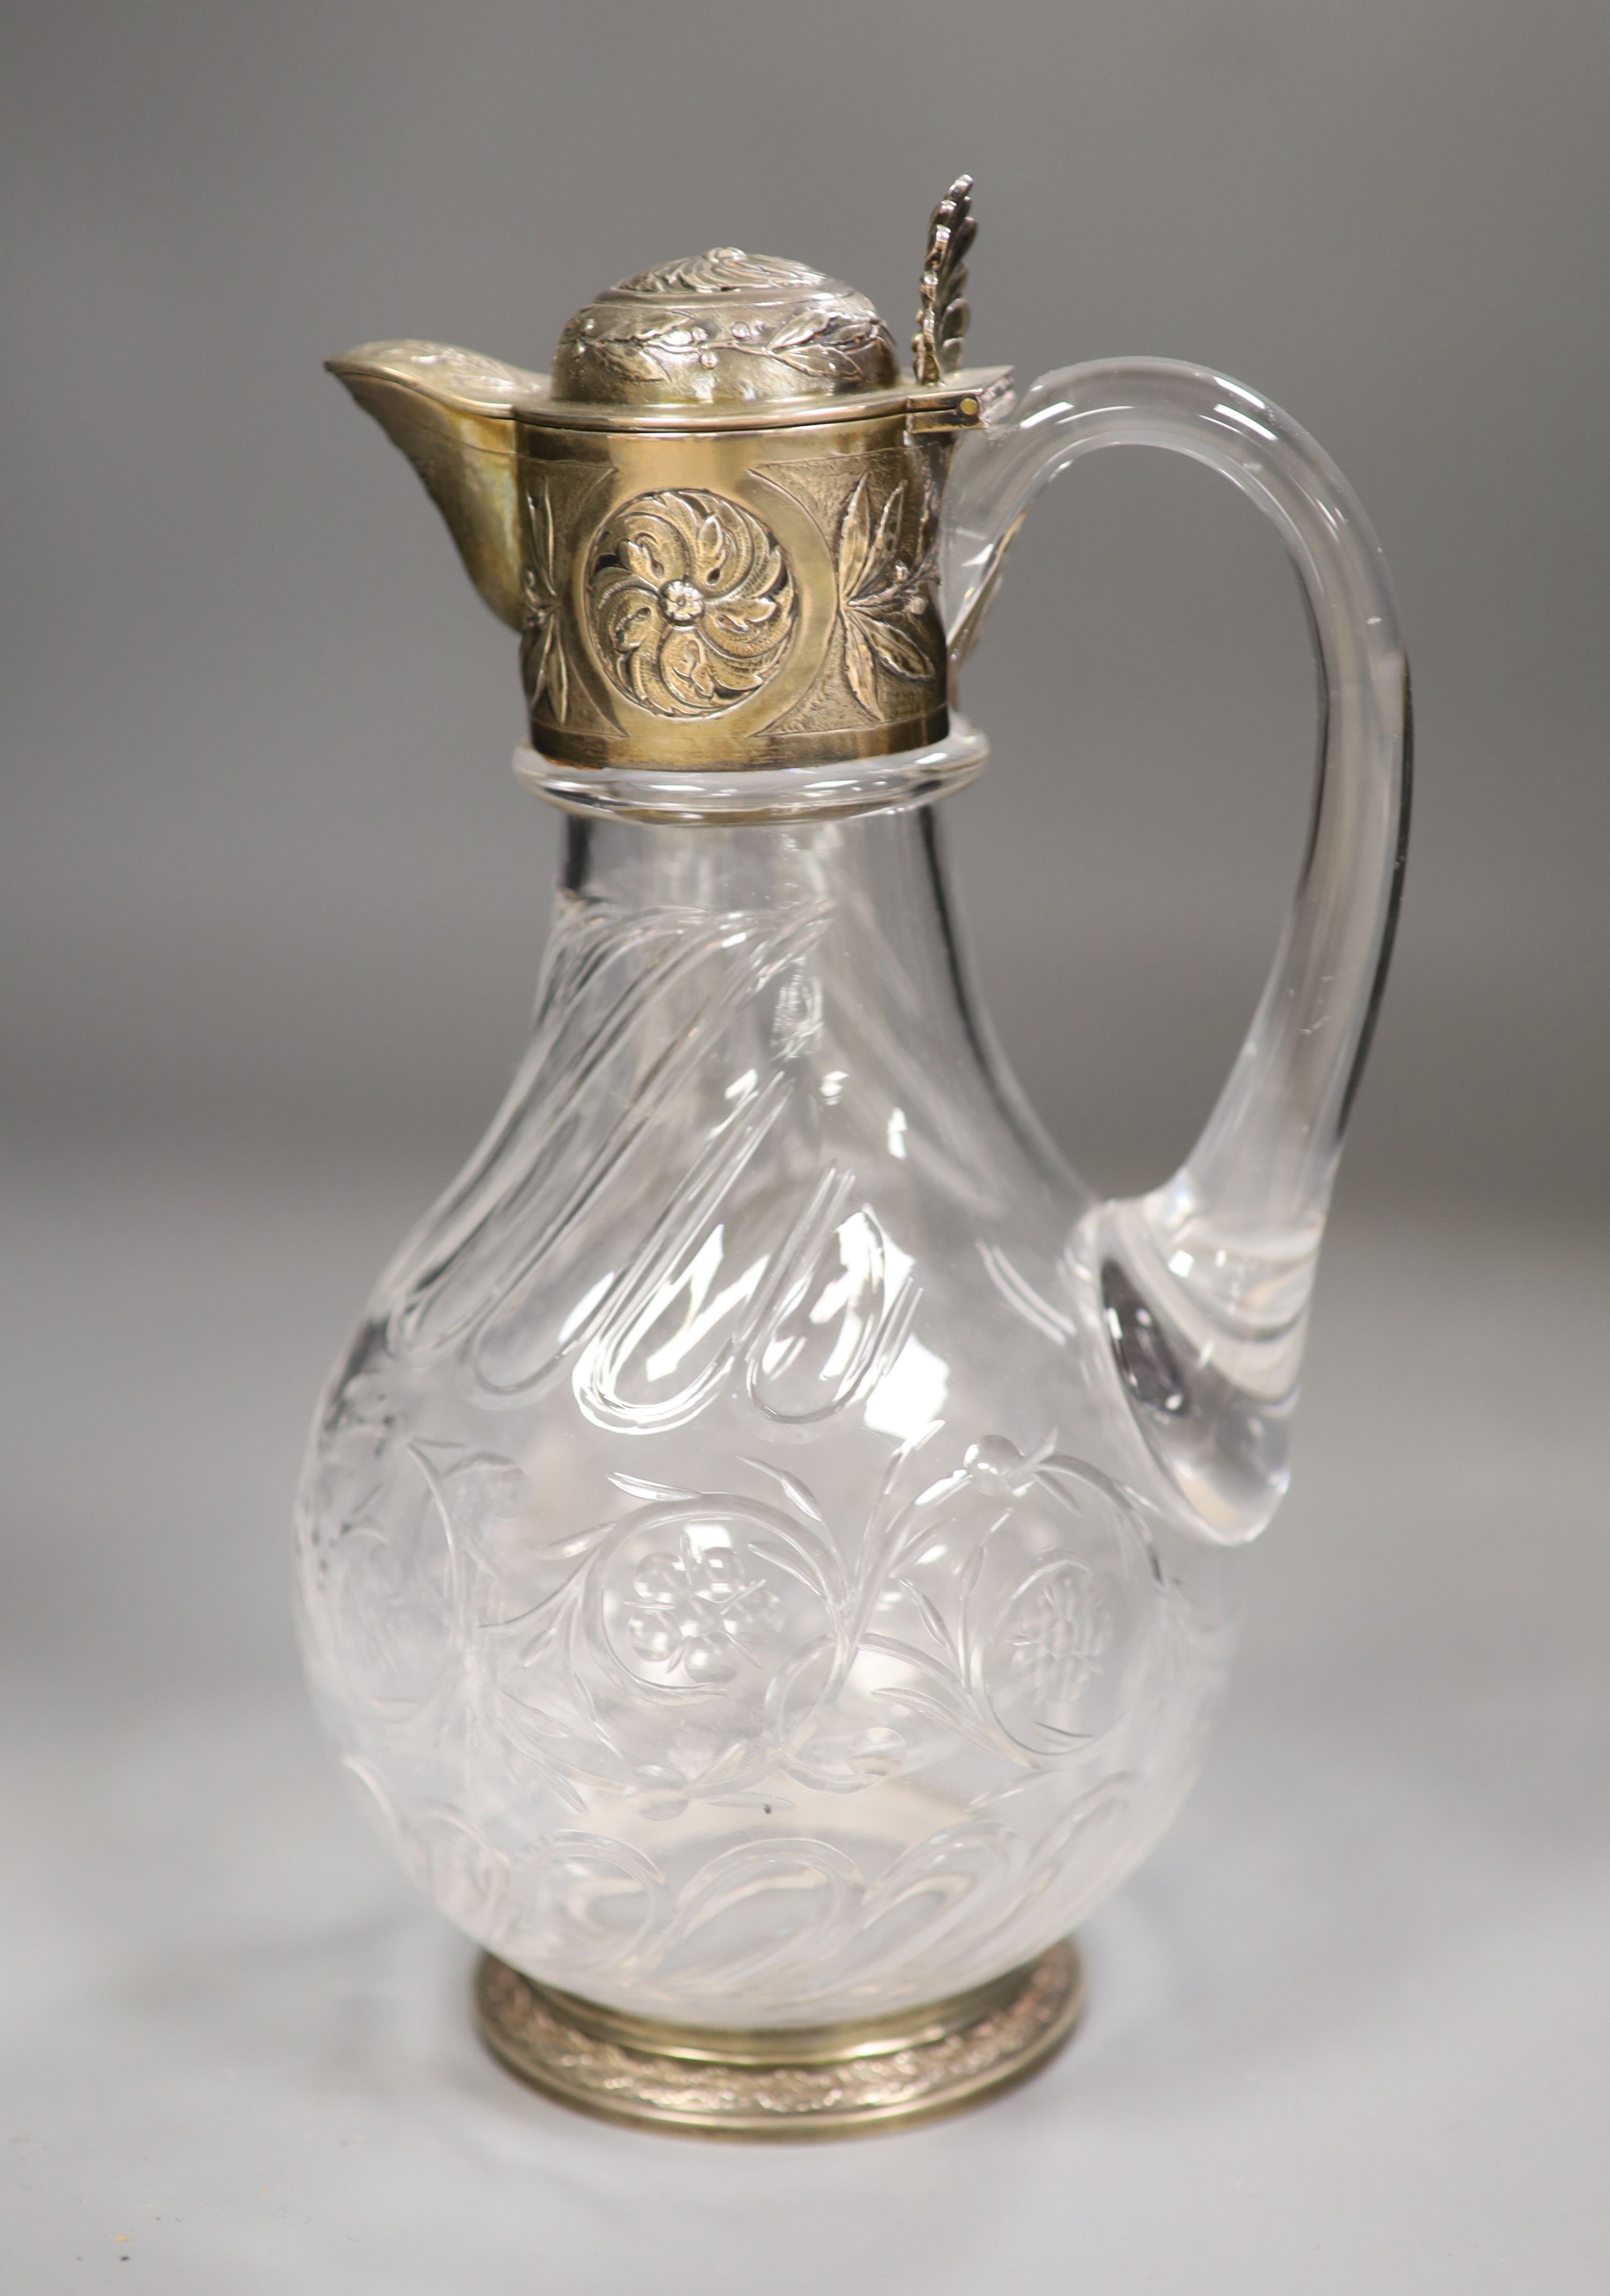 An early 20th century French white metal mounted glass claret jug, maker AL, height 23cm. - Image 2 of 3